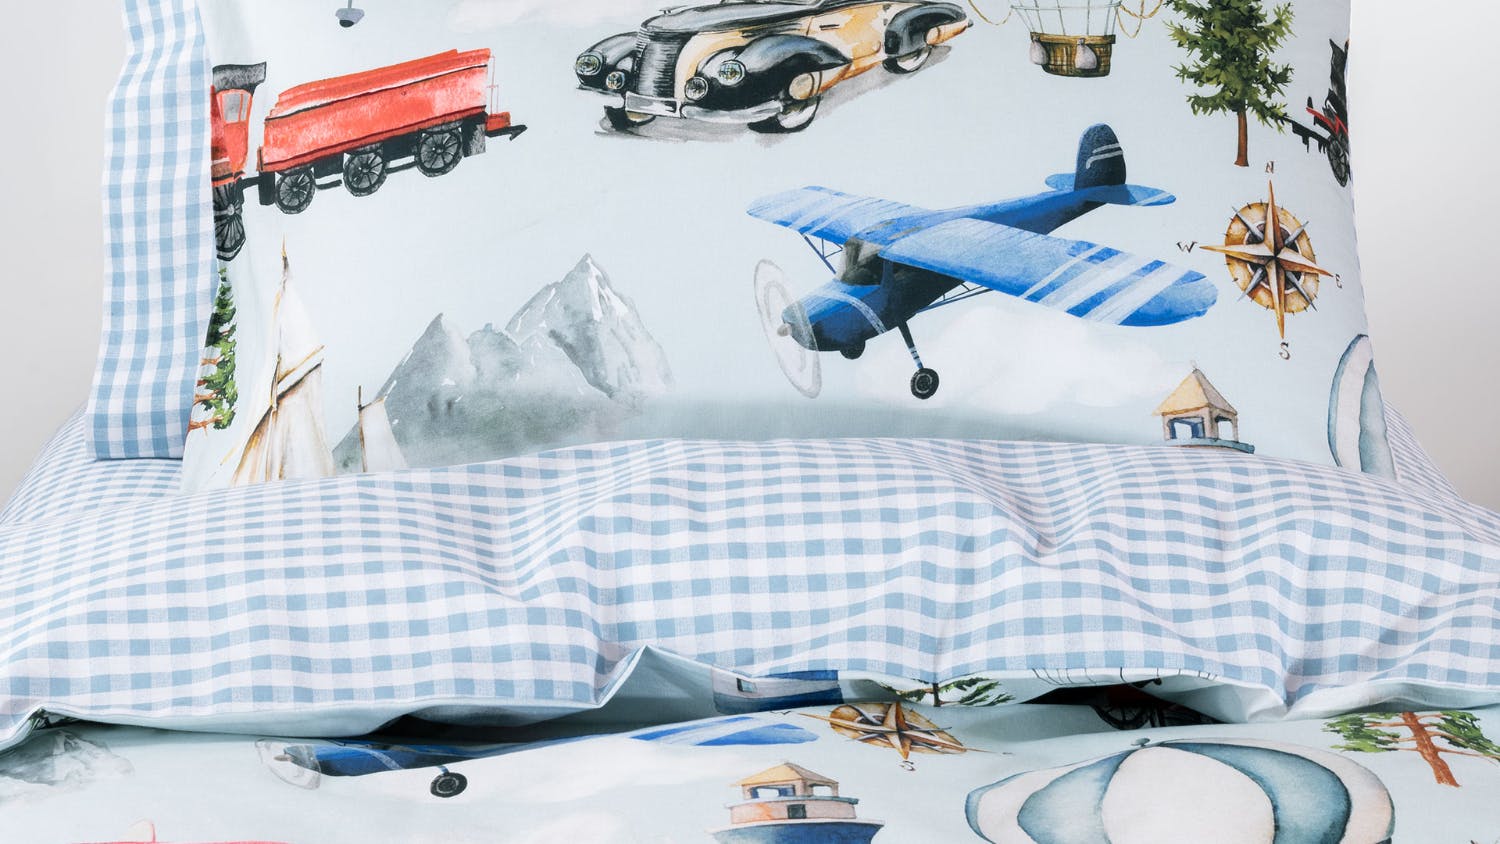 Transport Tales Duvet Cover Set by Squiggles